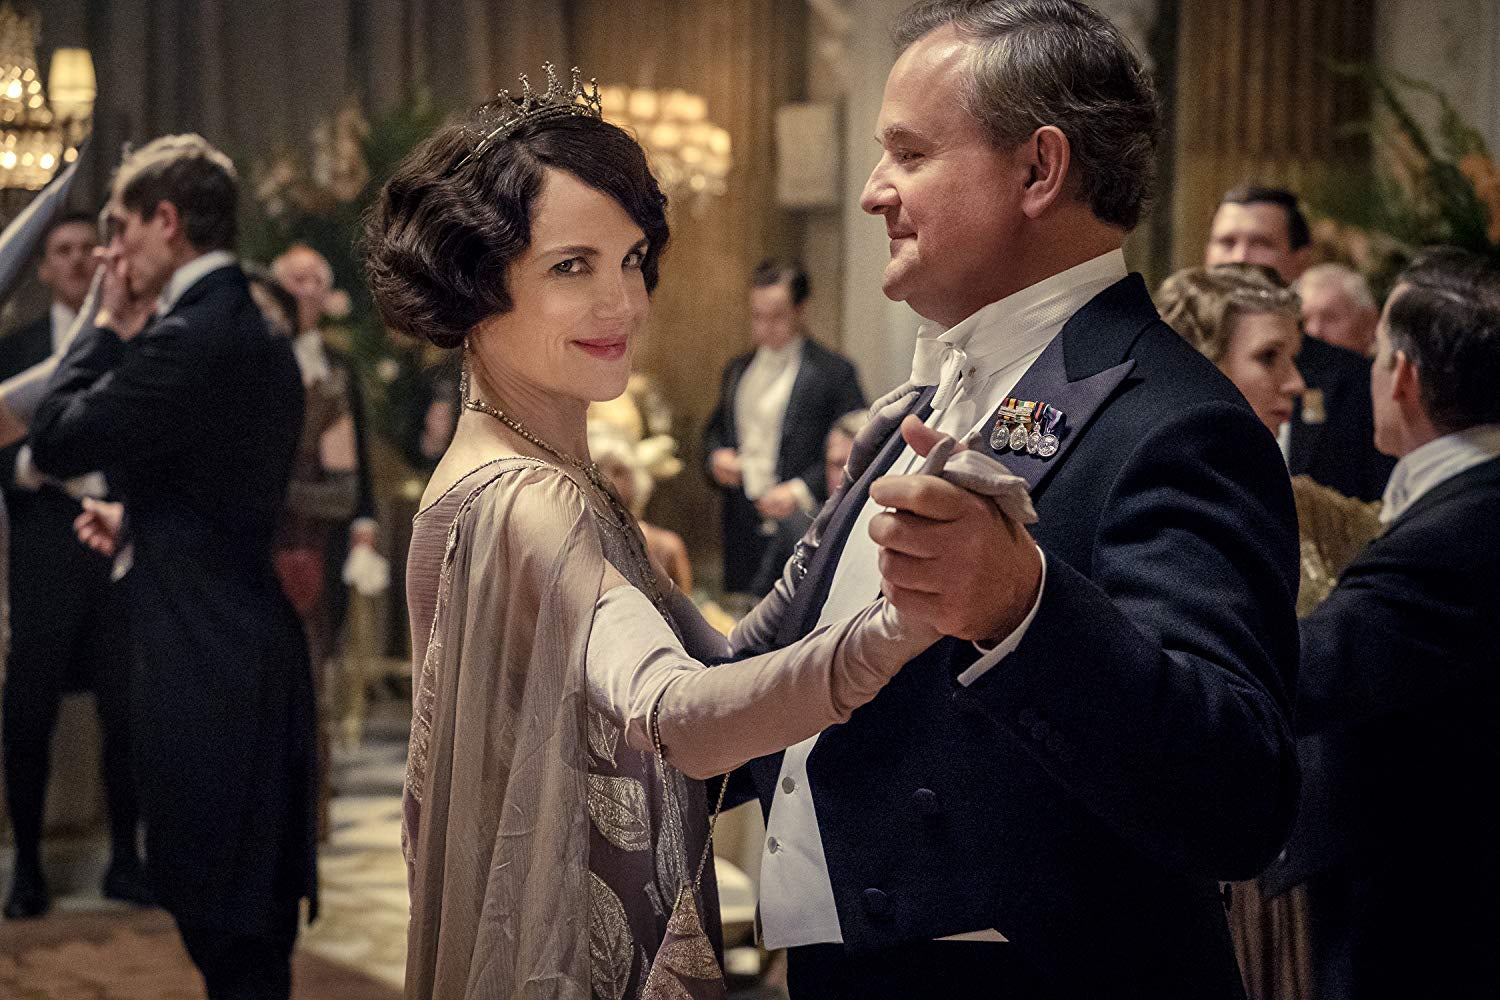 Elizabeth McGovern gives the camera a sly smile while dancing with Hugh Bonneville in a still from Downton Abbey.